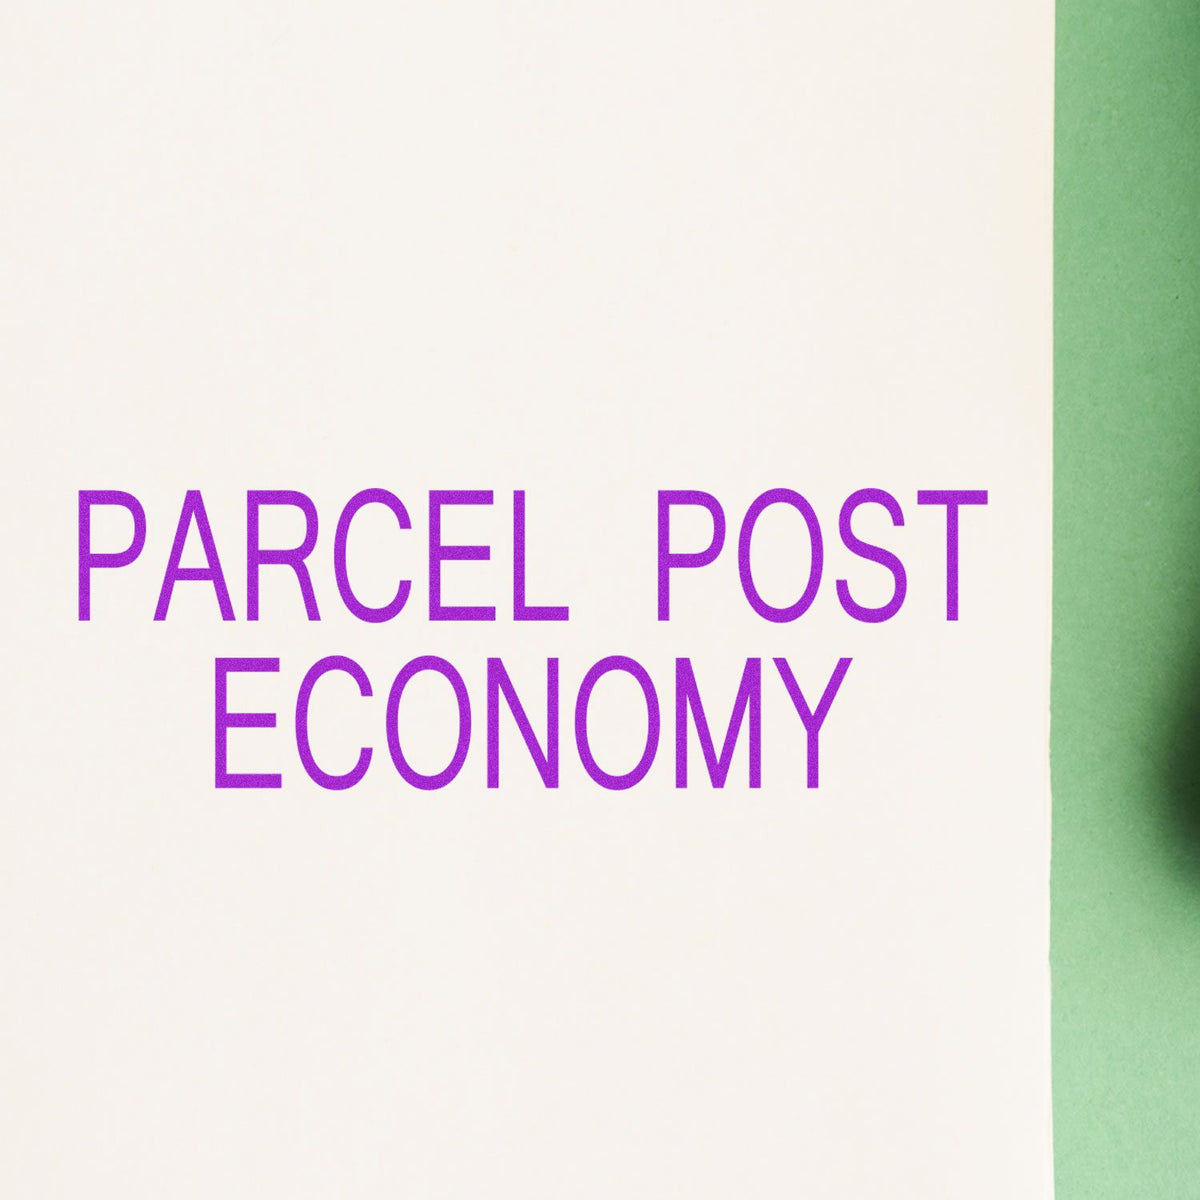 Large Parcel Post Economy Rubber Stamp In Use